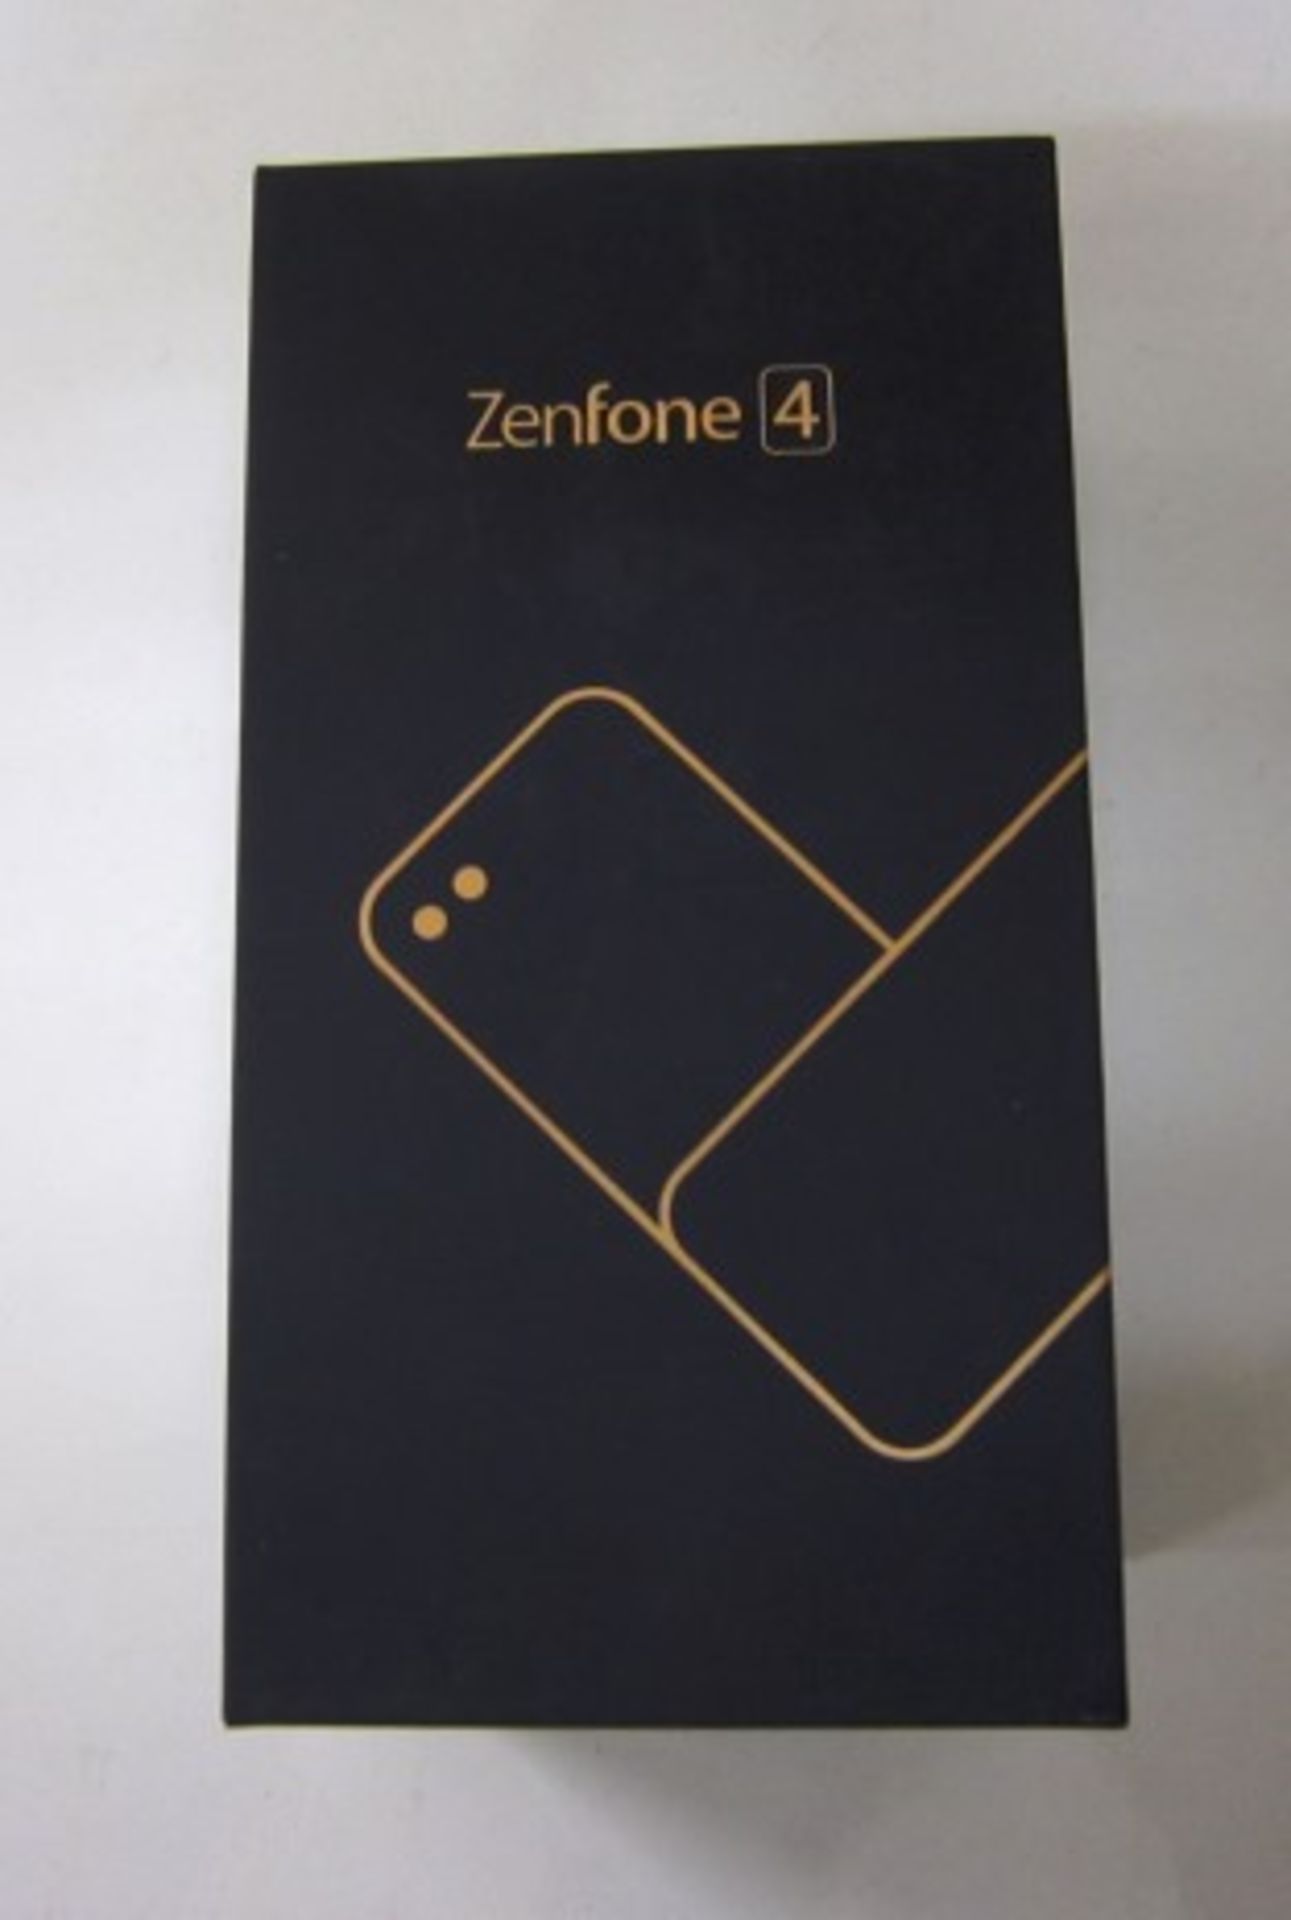 ASUS Zenphone 4 in black 64GB comes with protective case, earphones and european charger. Tested